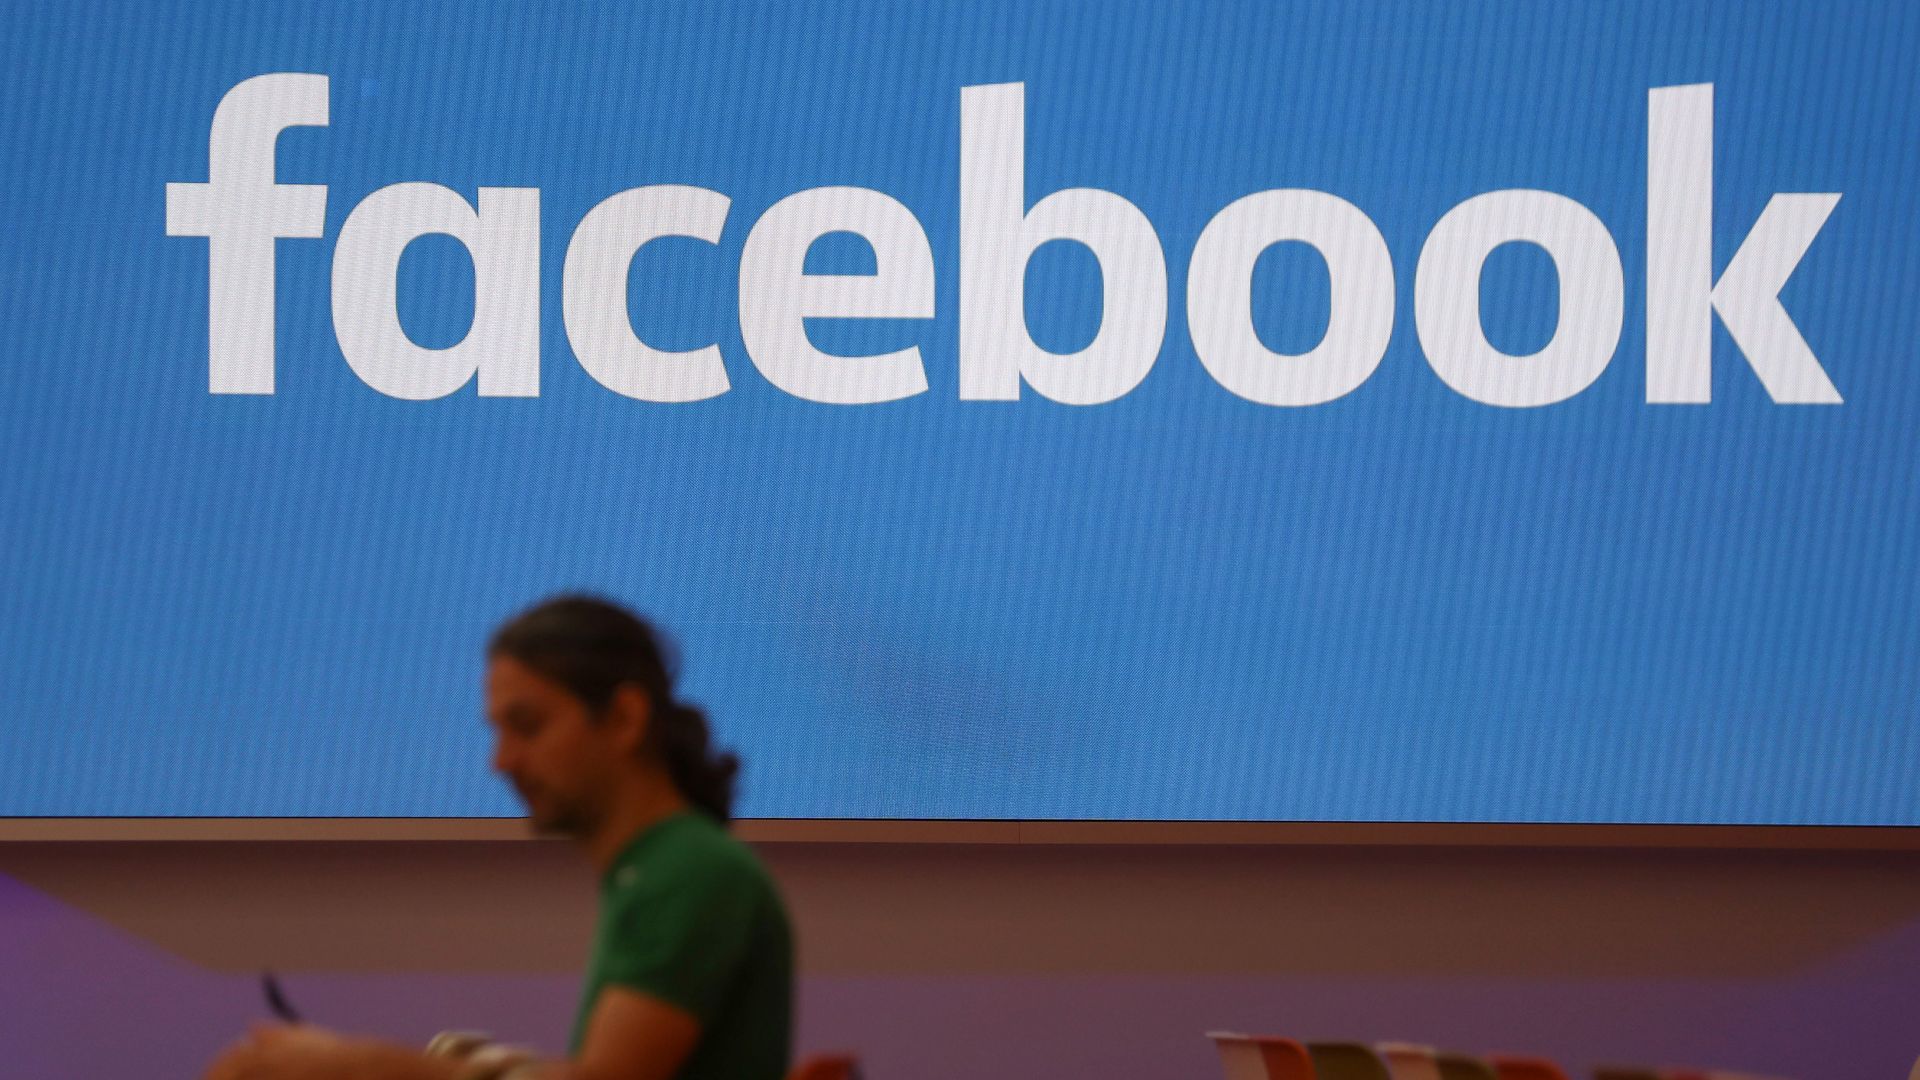 A man wearing a green t-shirt sits in front of a Facebook sign